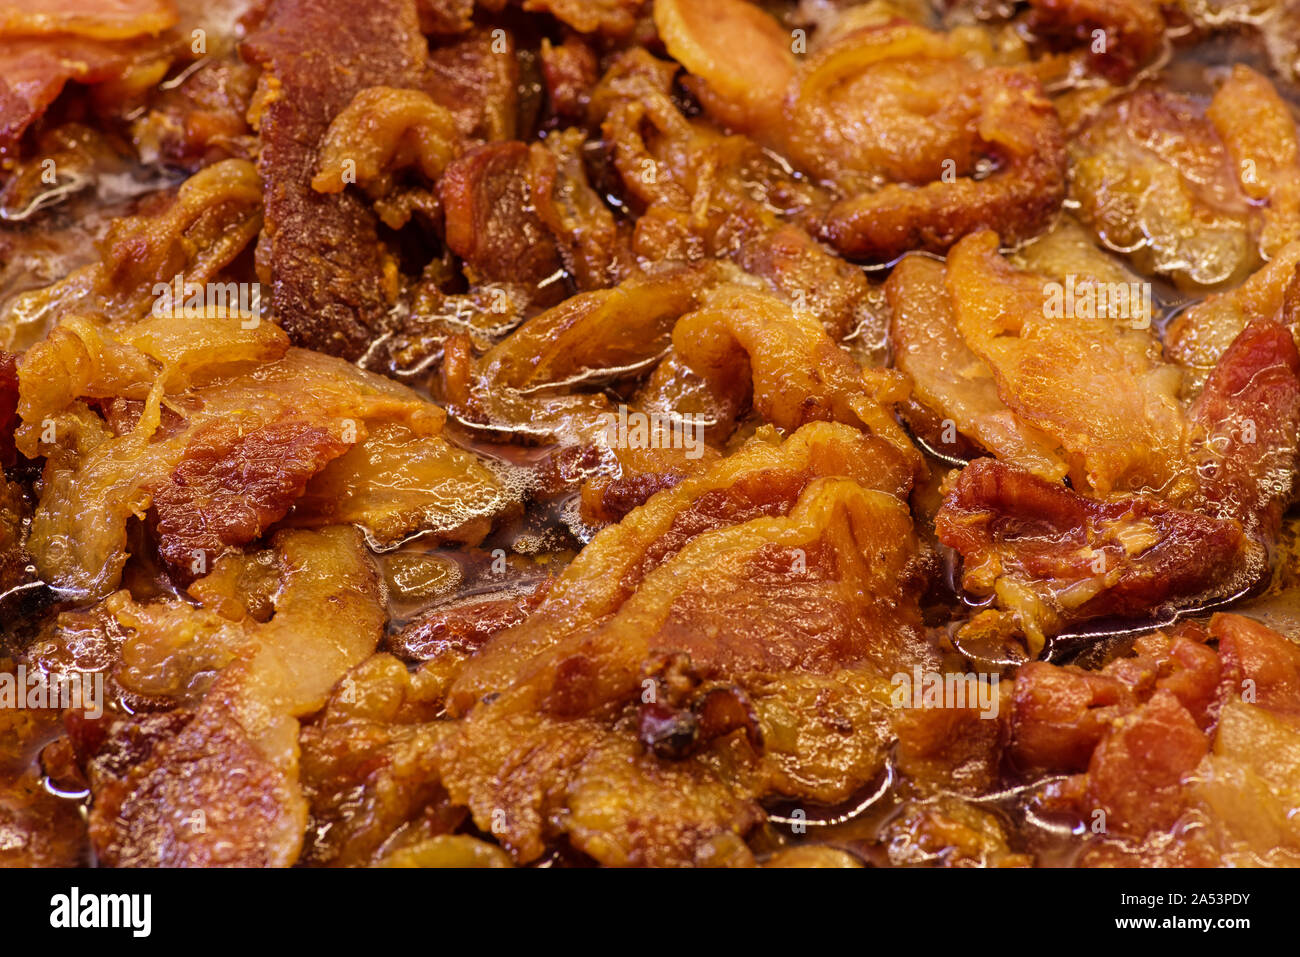 background of bacon ends frying in bacon grease Stock Photo